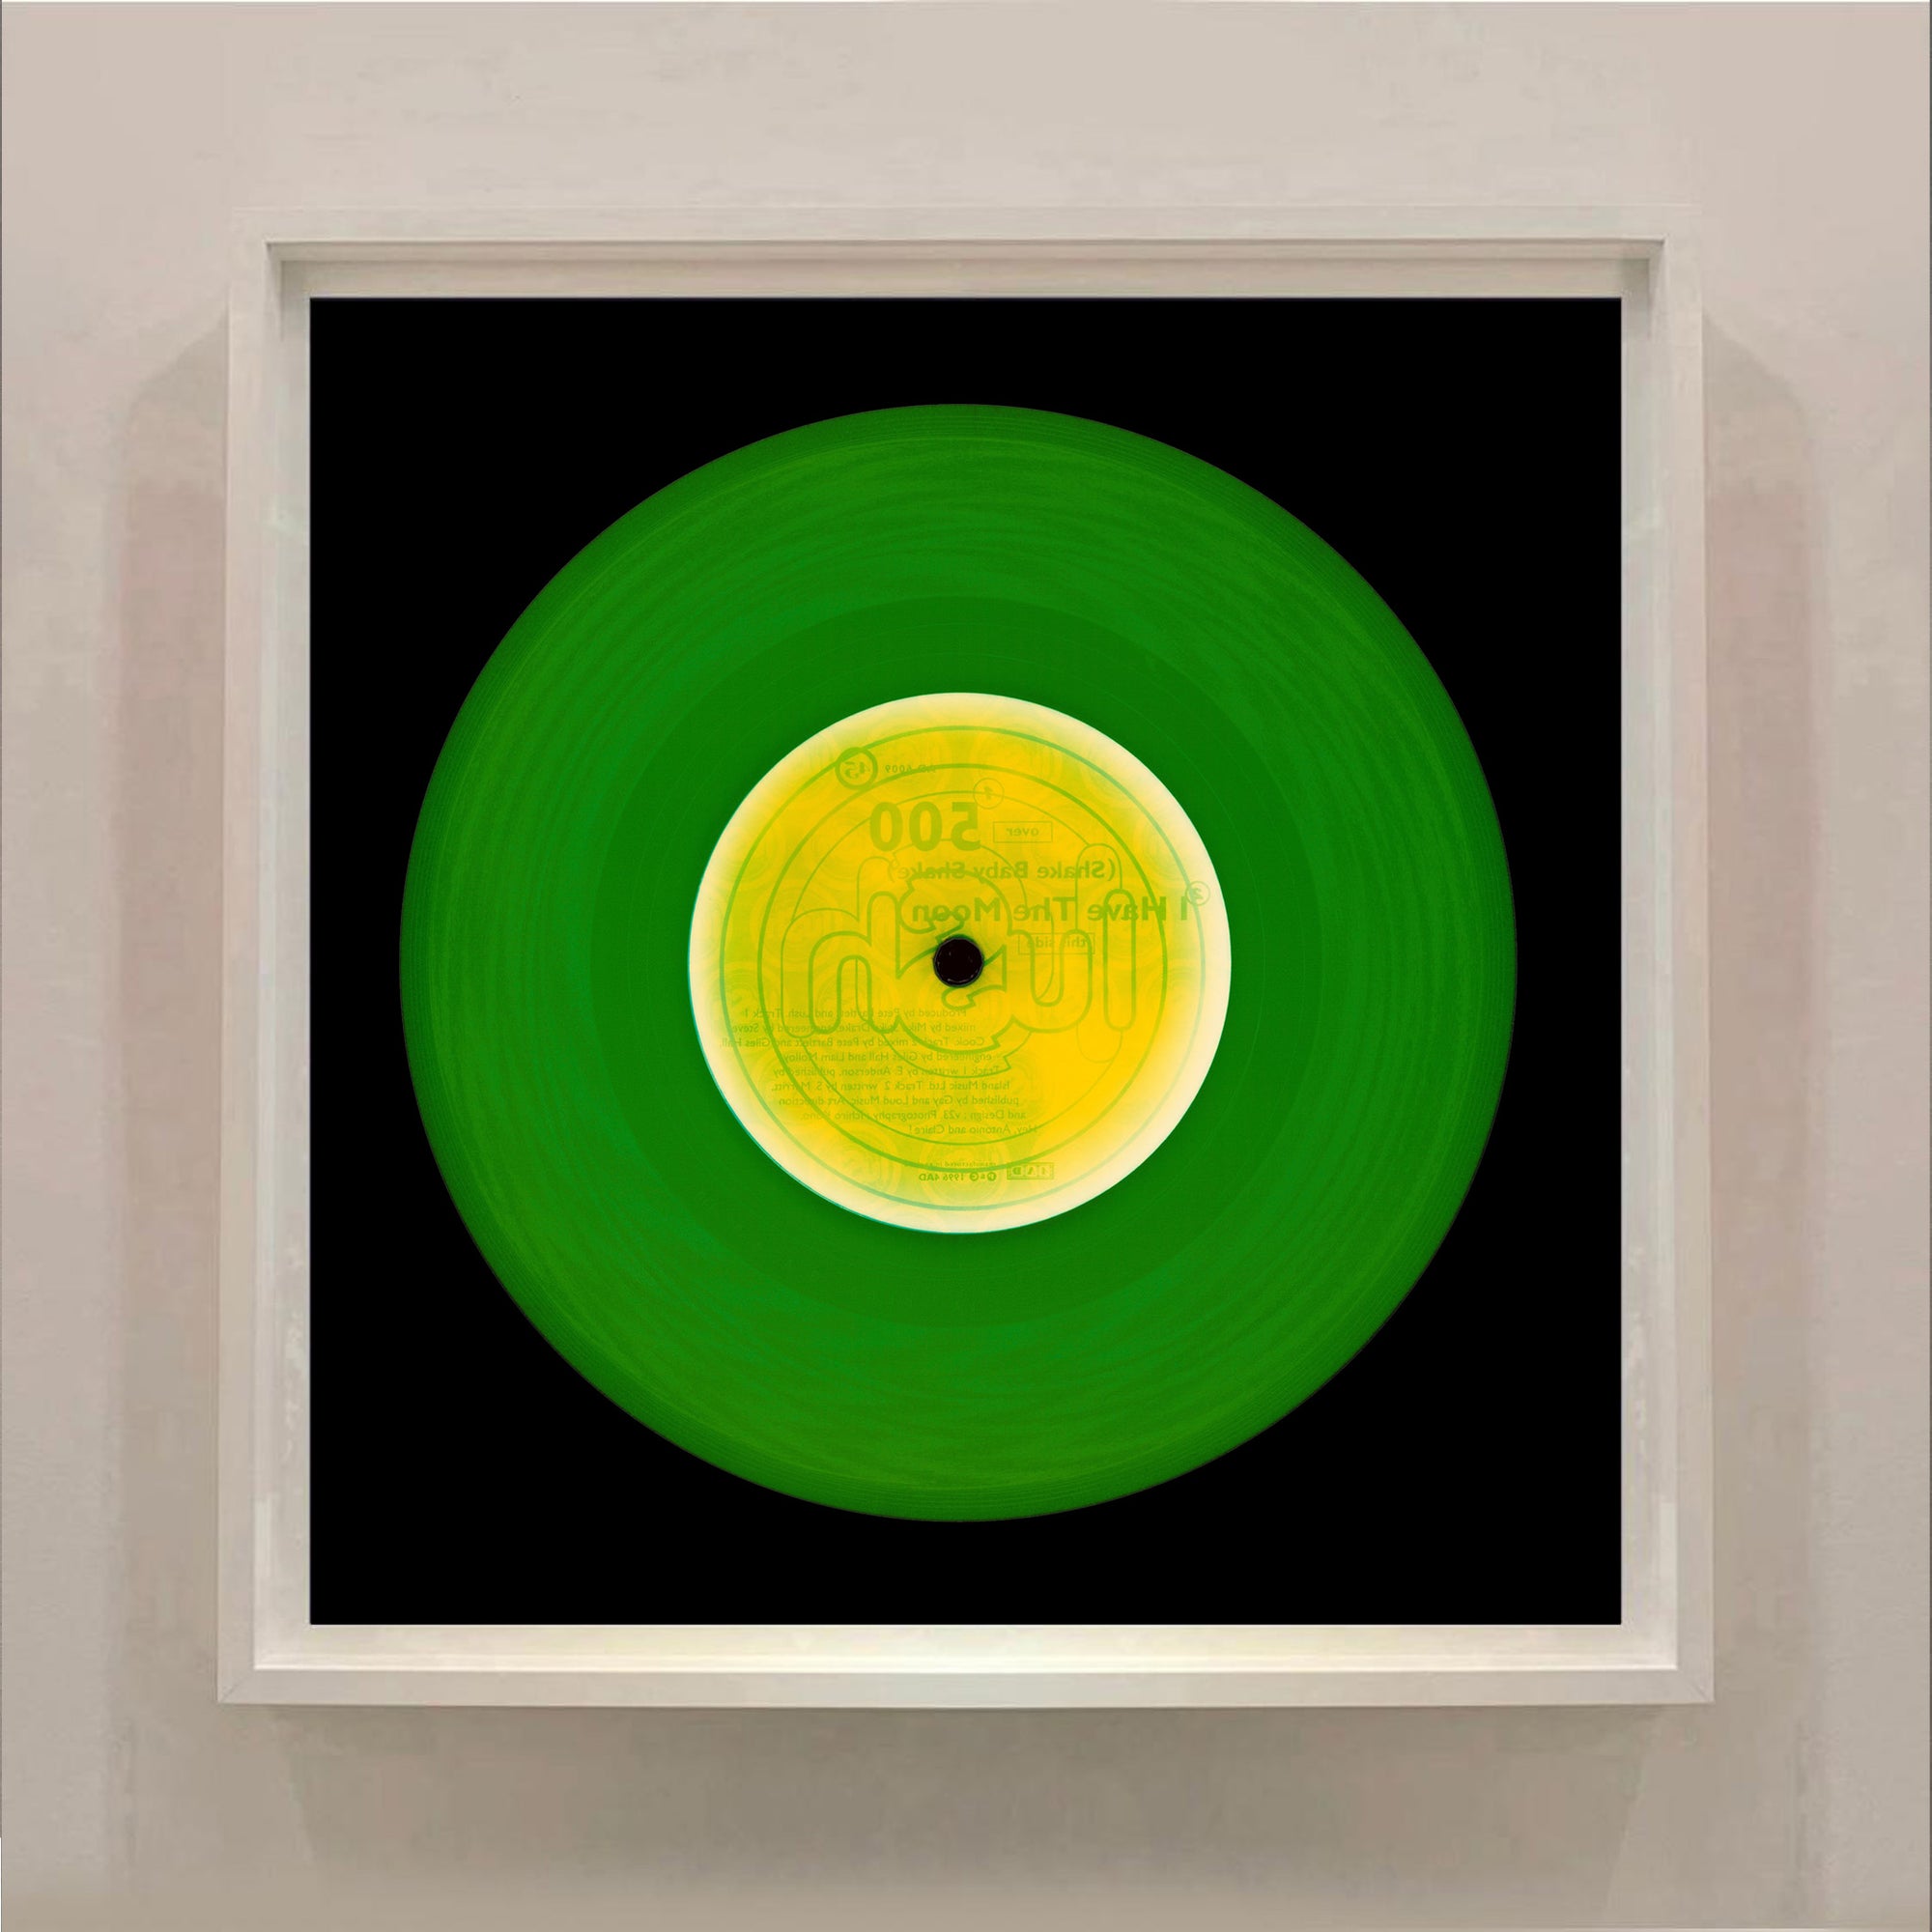 Vinyl Collection 'This Side' (Forest Green). Acclaimed contemporary photographers, Richard Heeps and Natasha Heidler have collaborated to make this beautifully mesmerising collection. A celebration of the vinyl record and analogue technology, which reflects the artists practice within photography.